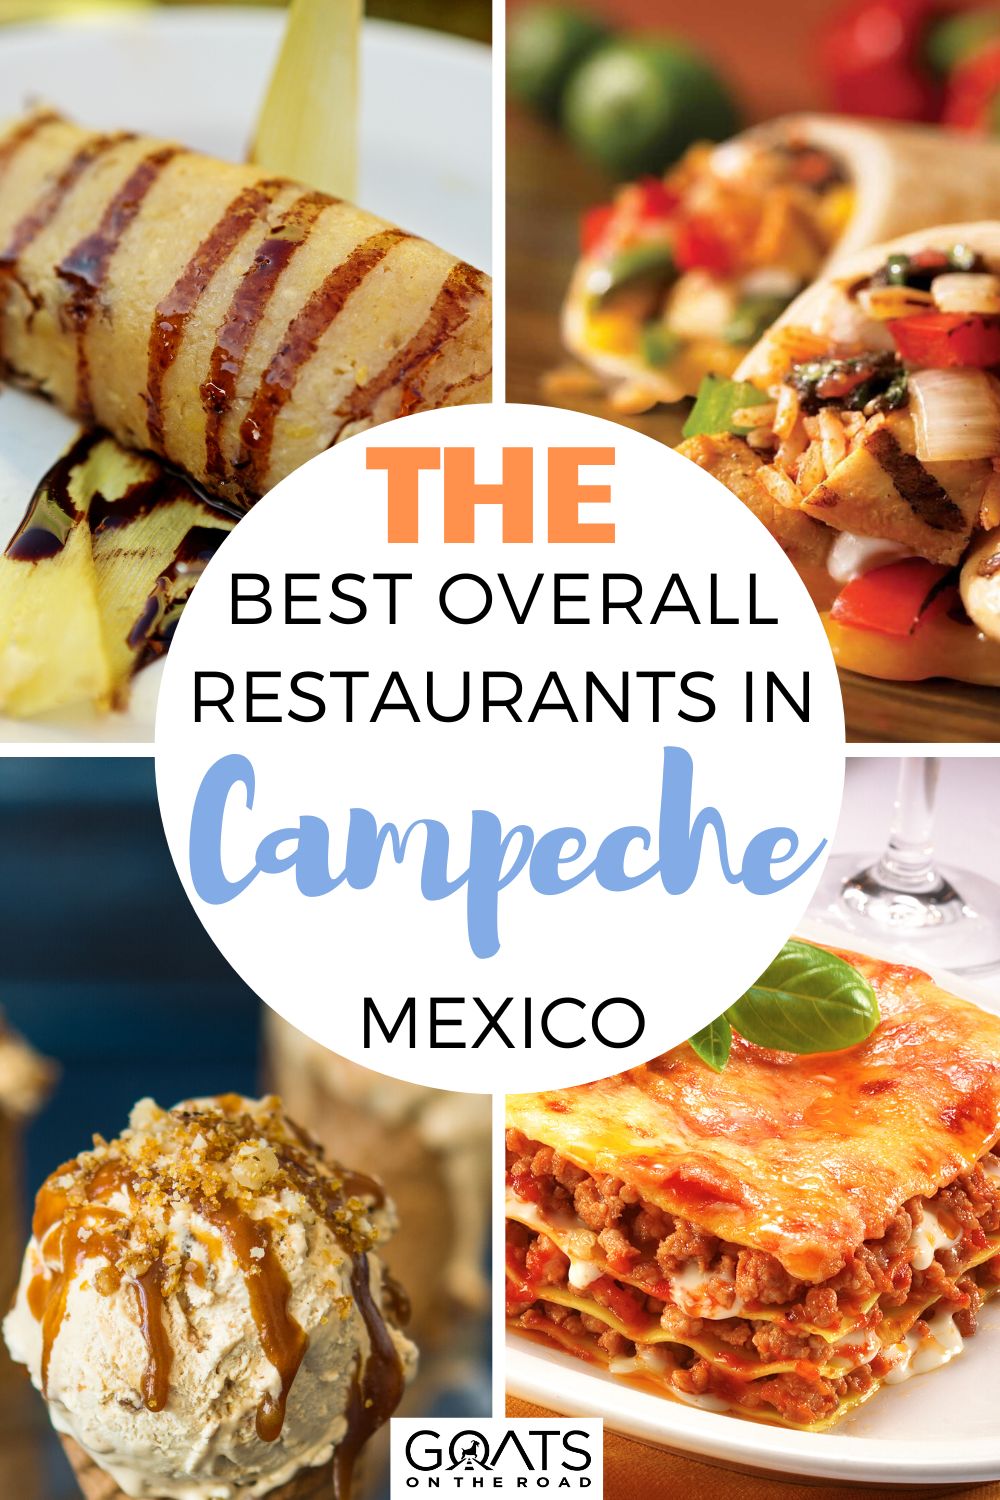 The Best Overall Restaurants in Campeche, Mexico